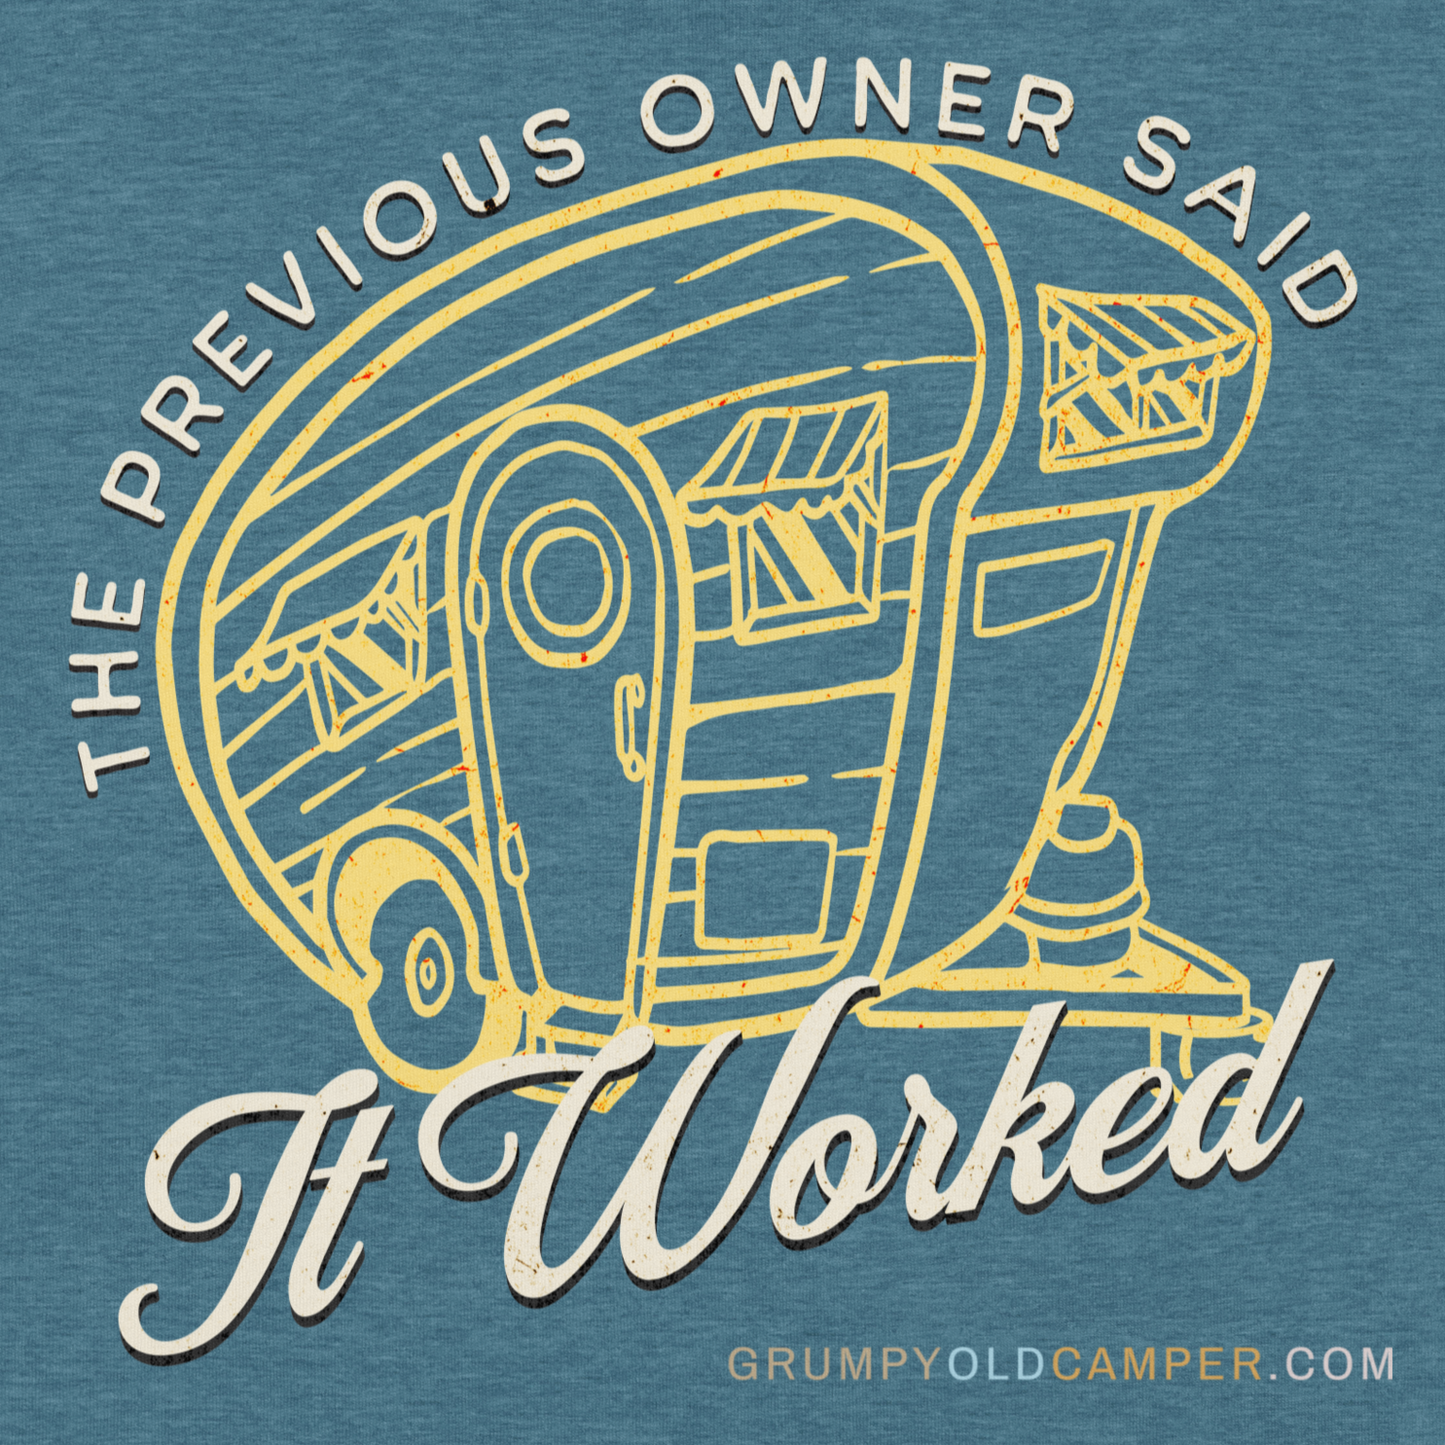 But... the previous owner said it worked! Unisex t-shirt